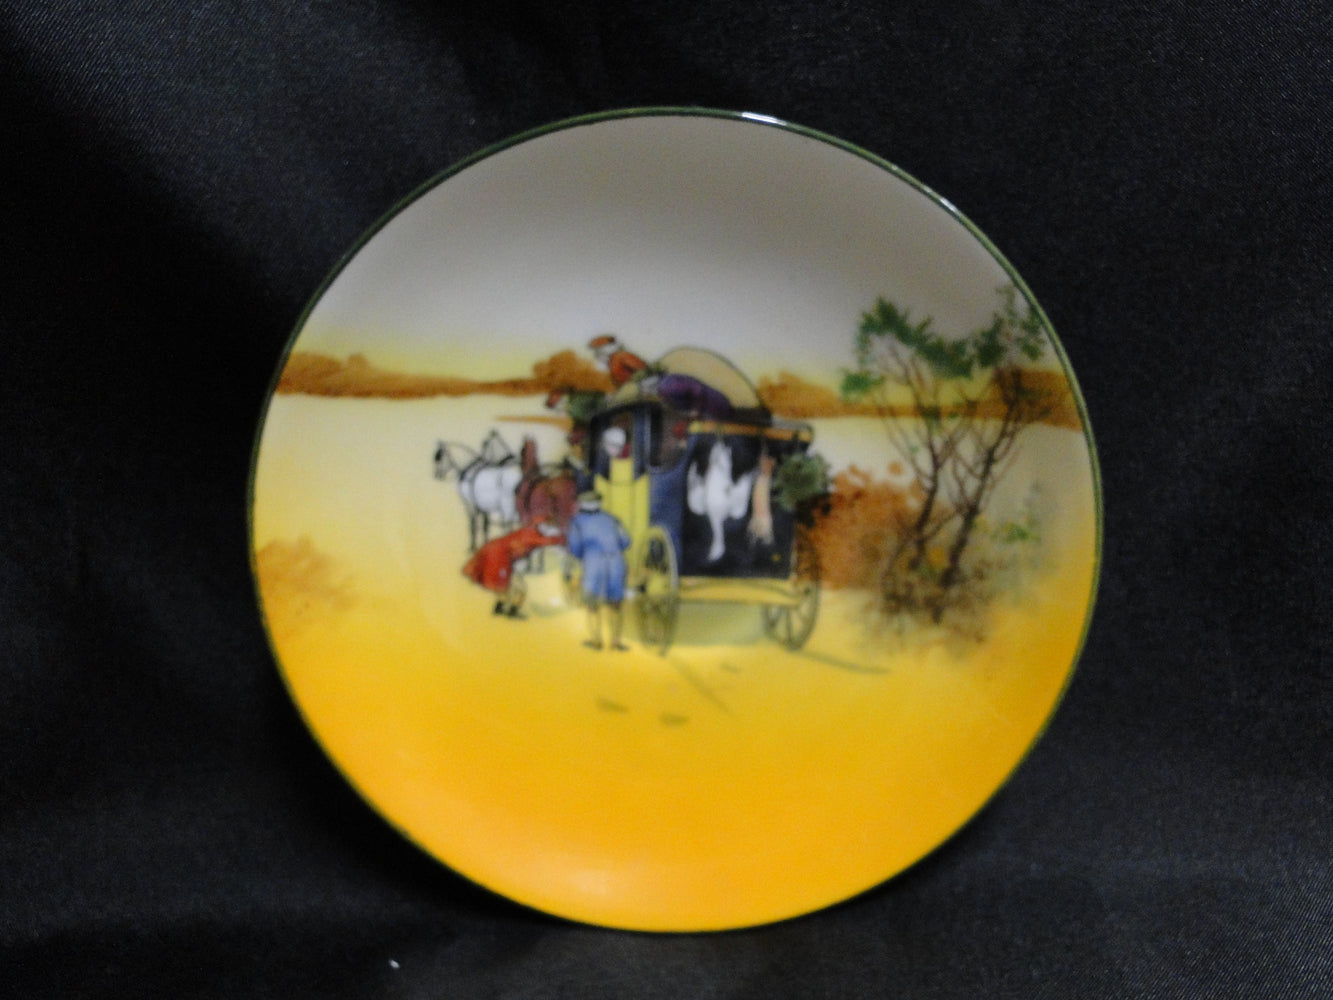 Royal Doulton Coaching Days, Coach w/ Hanging Animals: 5 1/2" Saucer (s) Only, 9